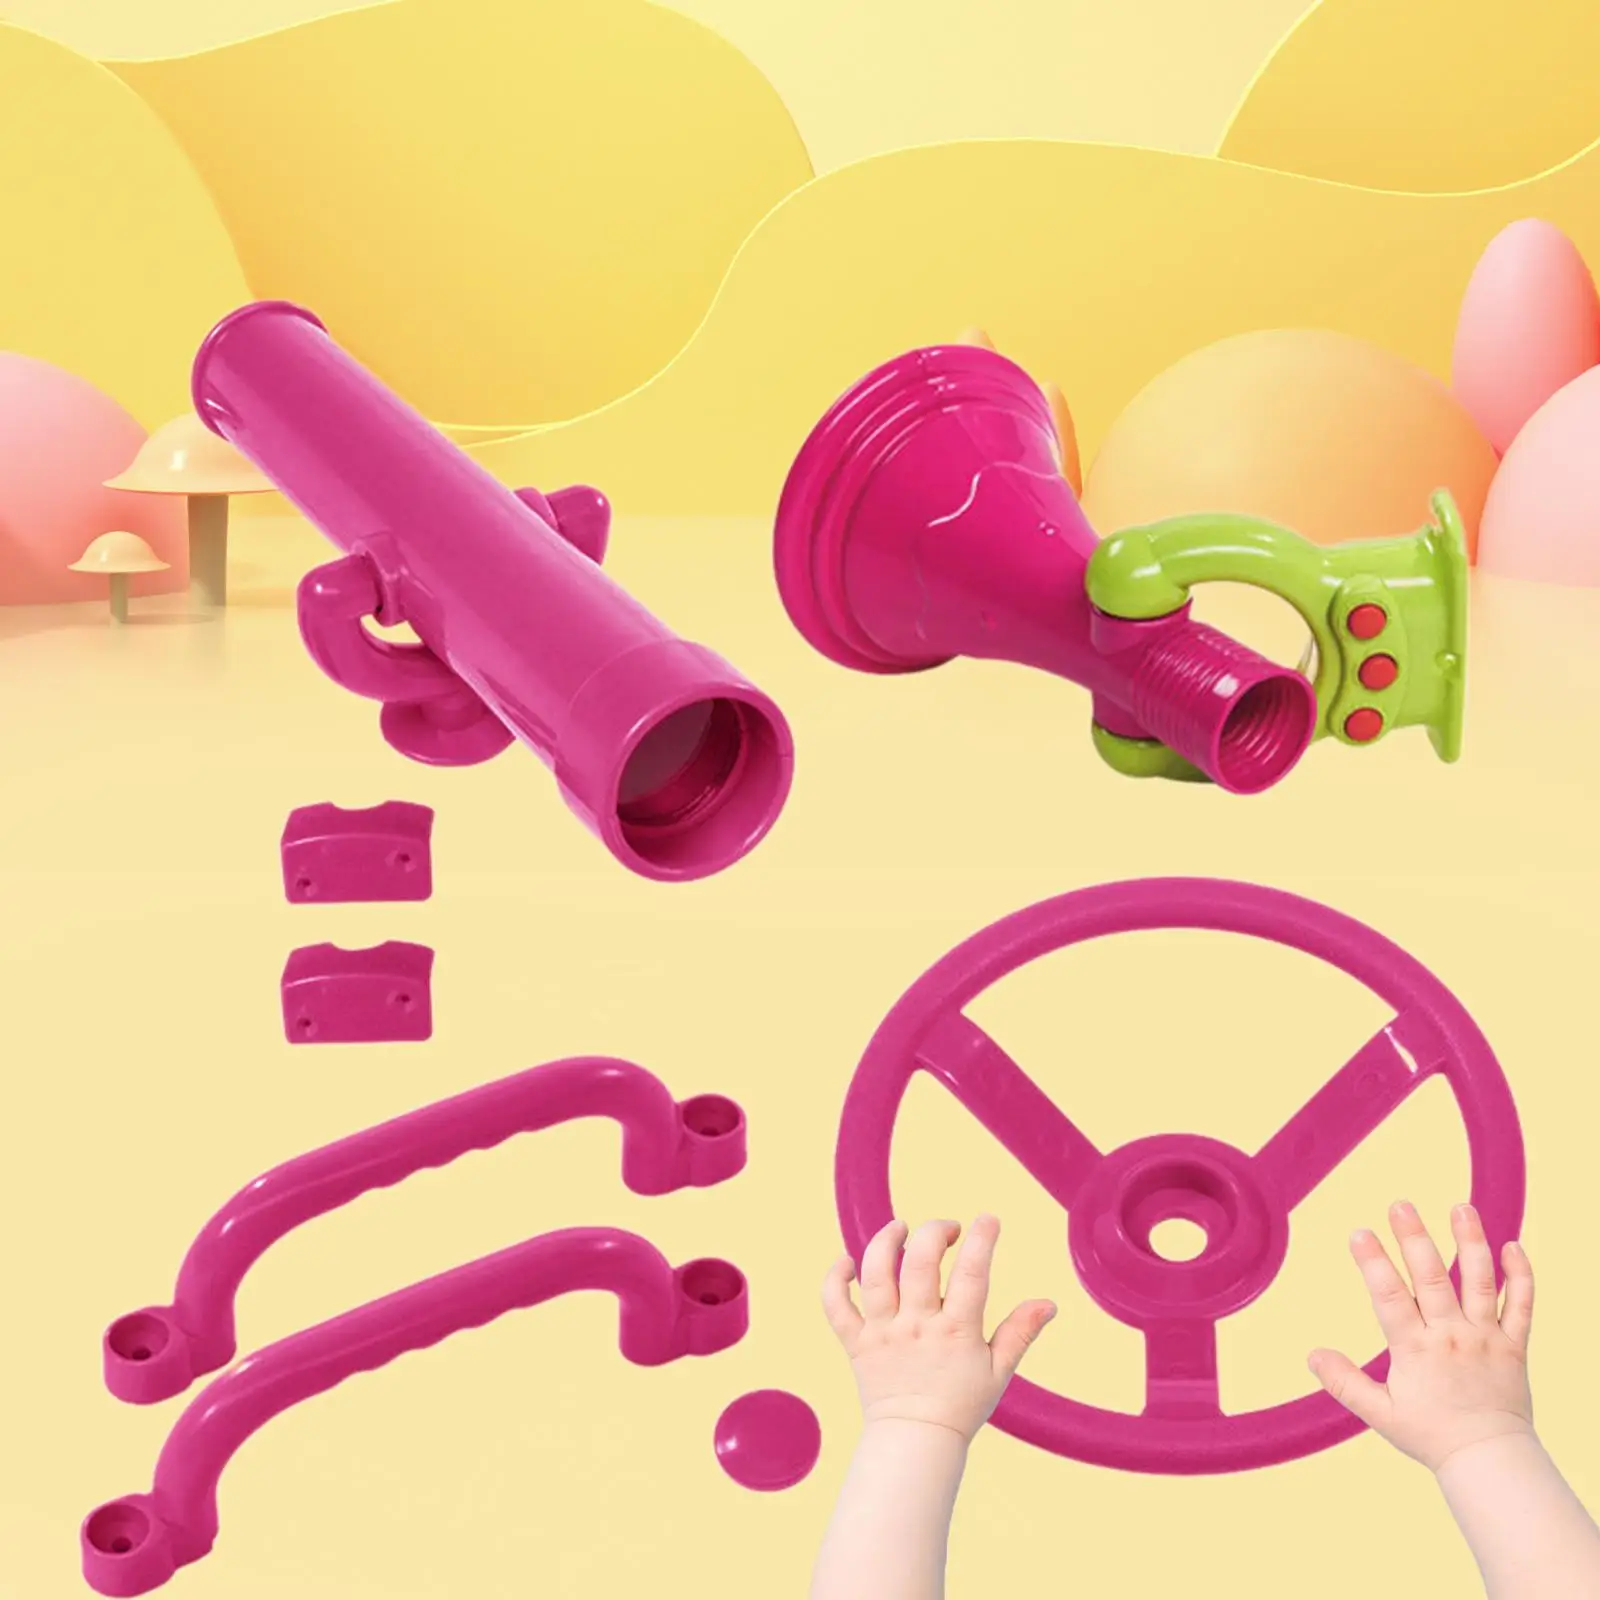 4x Playground Accessories Pink Playset Parts Pirate Ship Wheel for Kids for Outdoor Playhouse Backyard Treehouse Boys Girls Kids